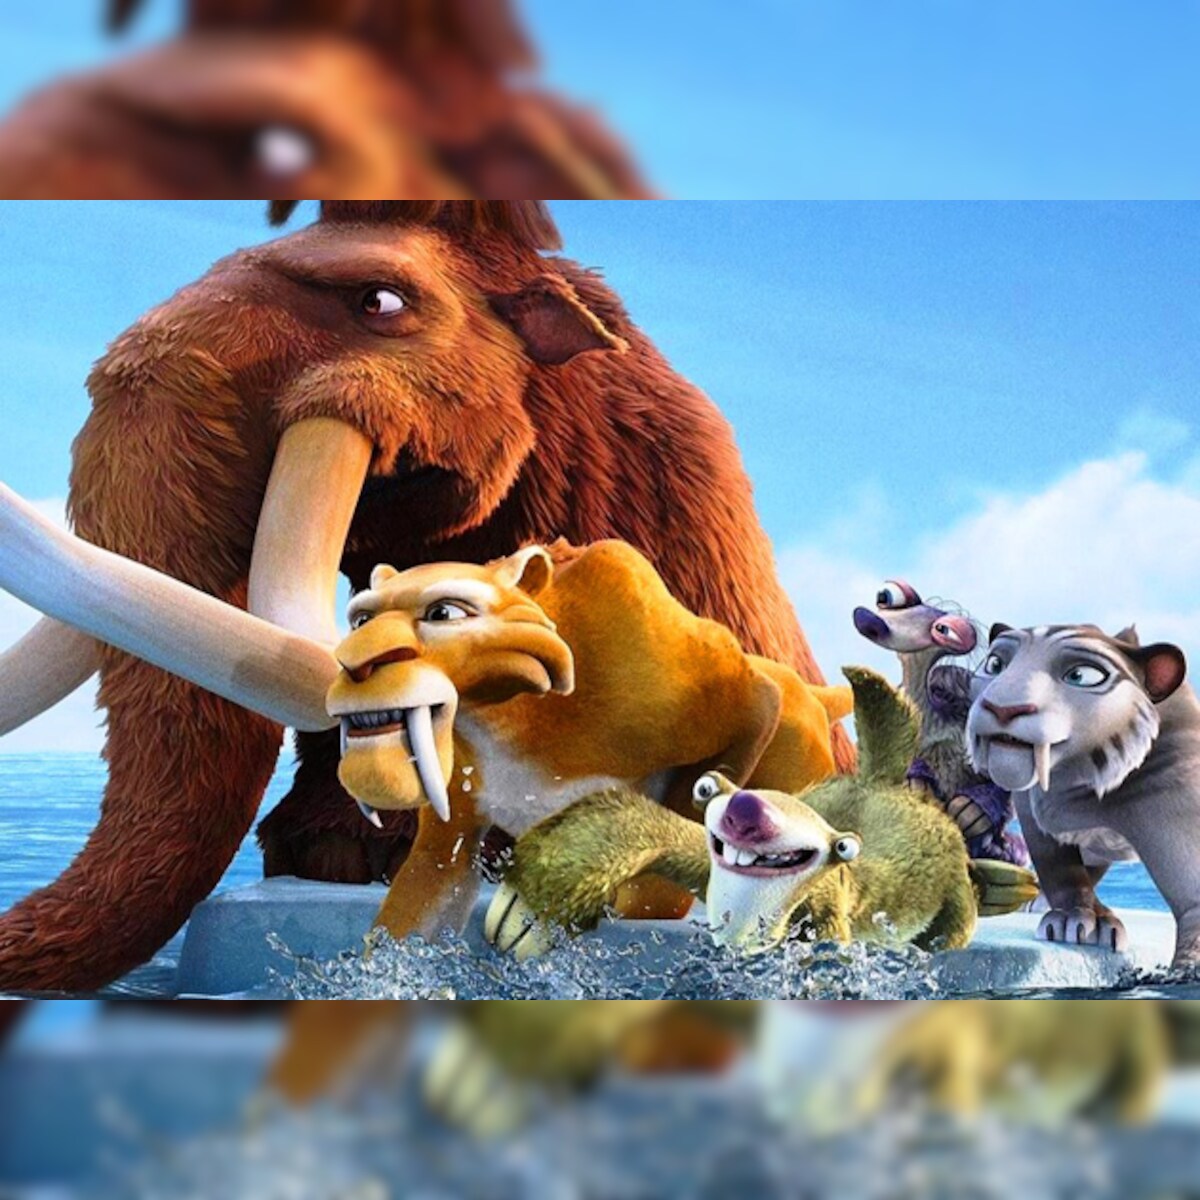 Ice Age 5 Set To Be Released On July 15 16